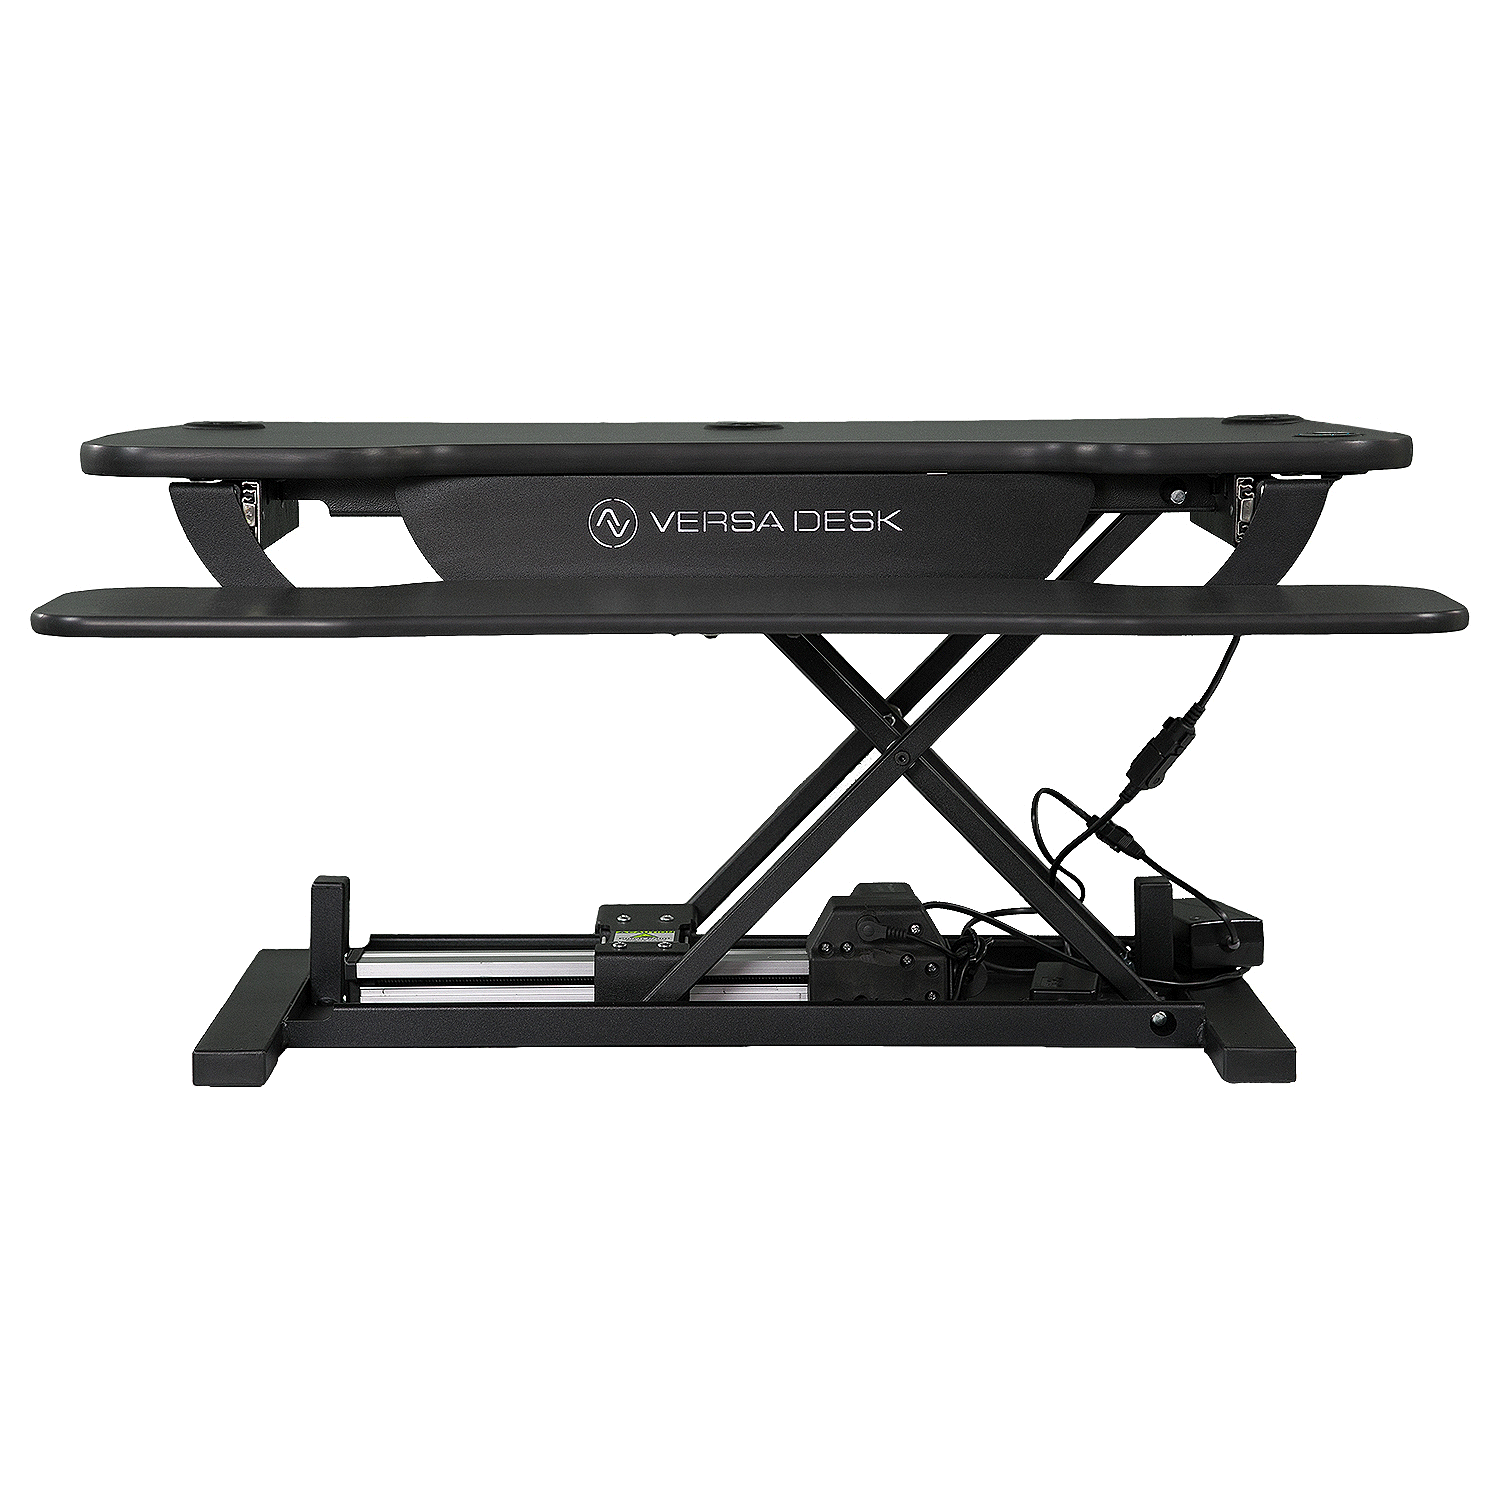 Electric height adjustment allows for you to go form sitting to standing at the push of a button with the Power Pro Plus Sit Stand Desk Converter